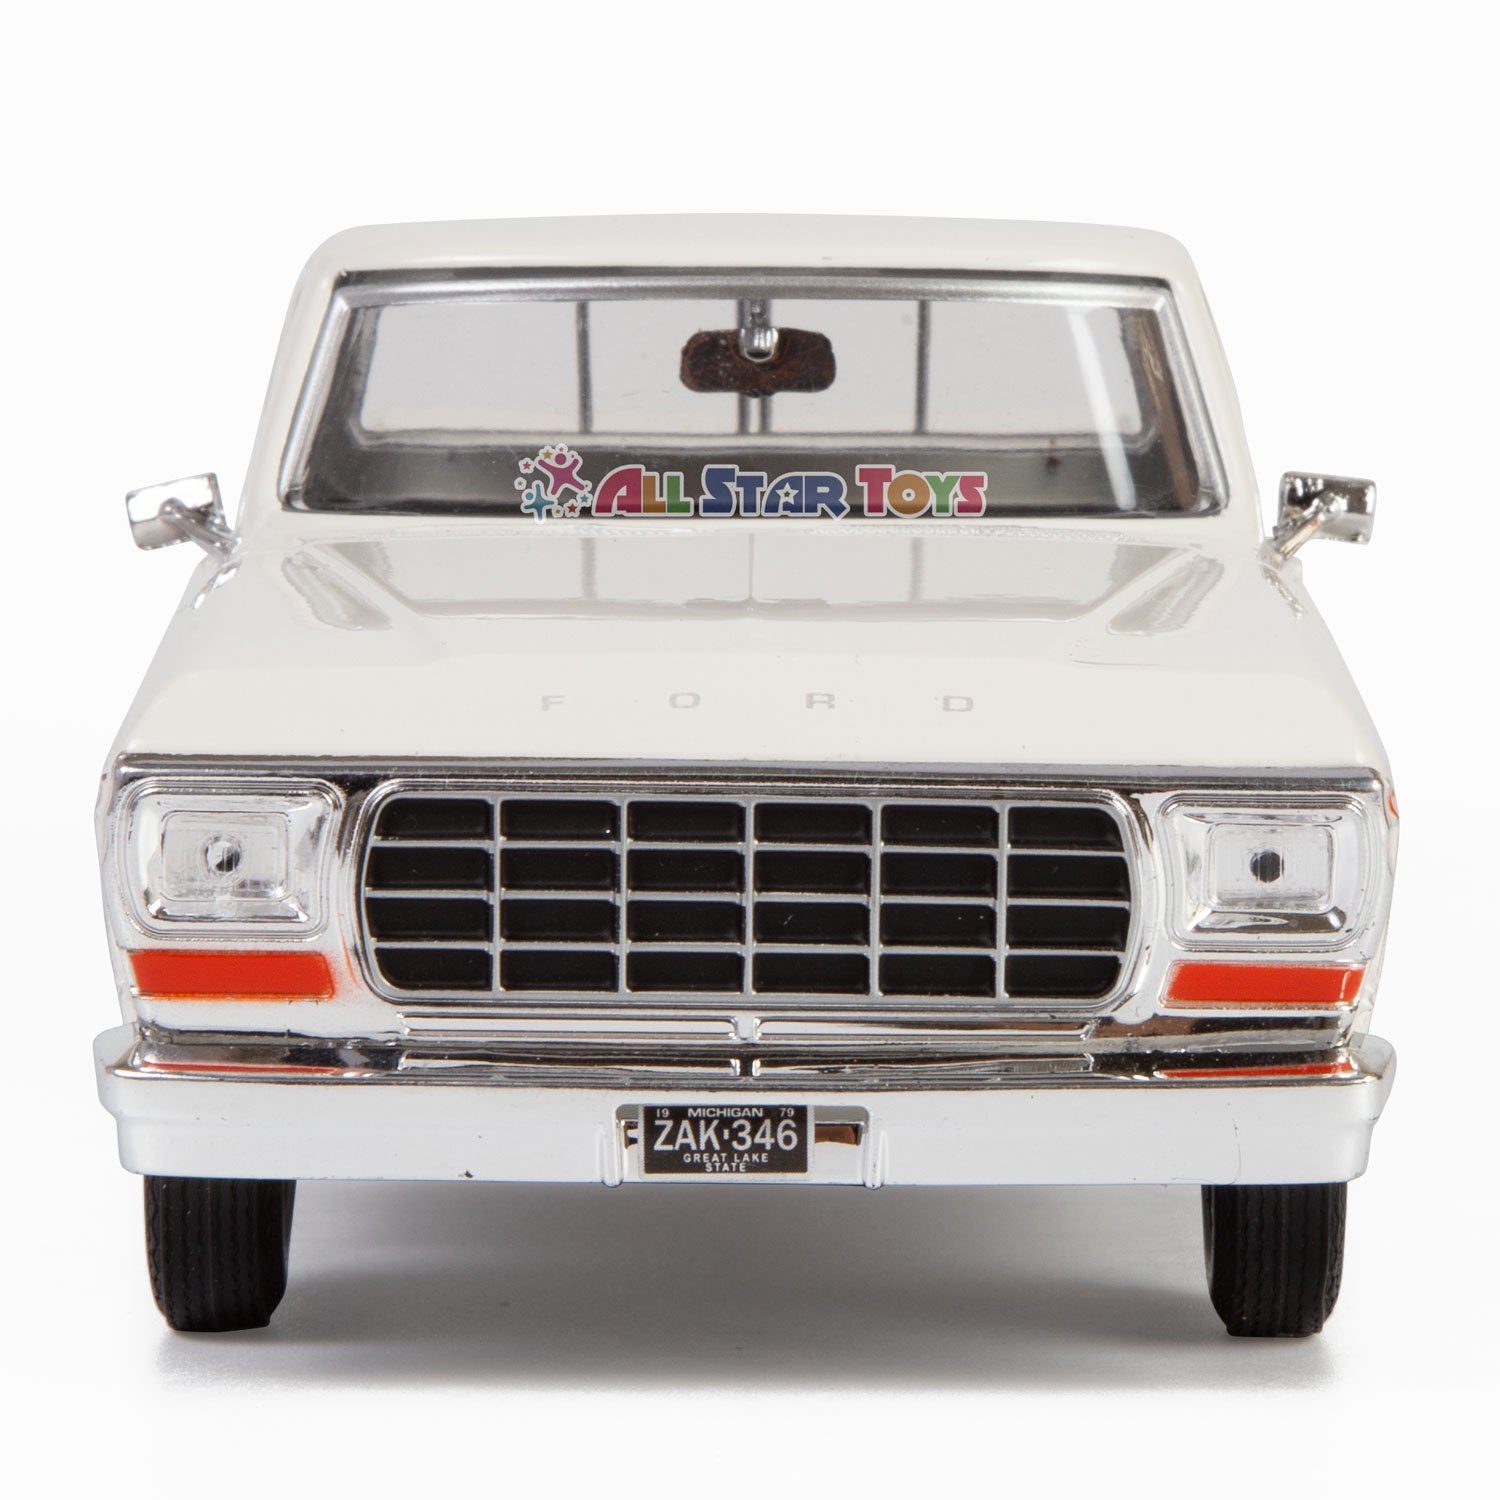 1979 Ford F-150 White 1:24 Scale Pickup Truck Die-cast Model Car by Mo –  All Star Toys